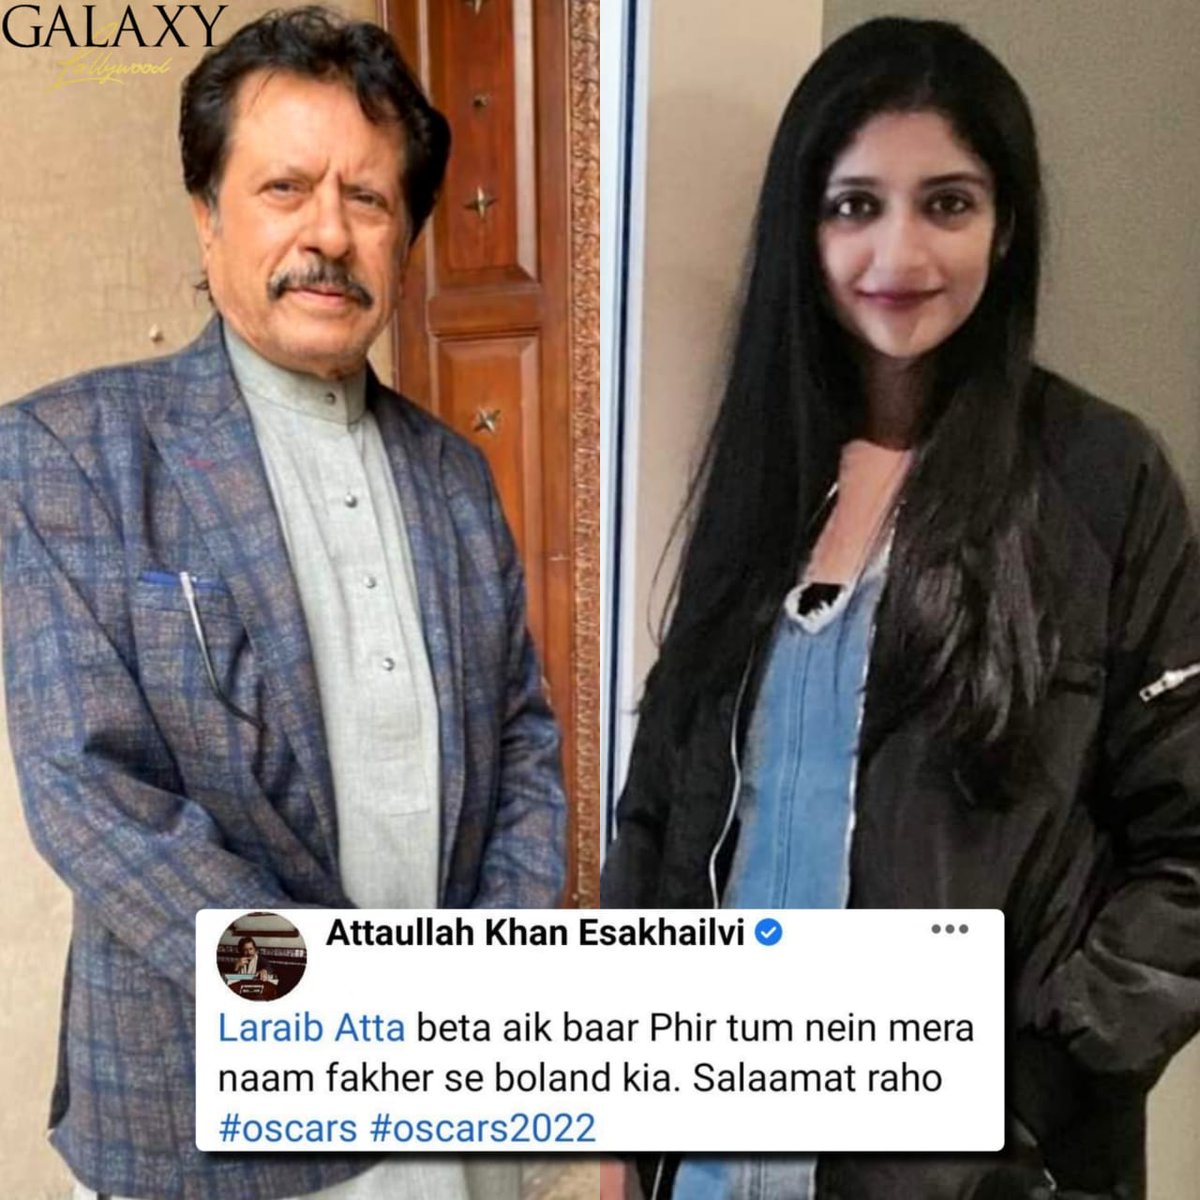 Attaullah Khan is a proud father as his daughter has been nominated for Oscar and BAFTA awards for her VFX work in 'No Time To Die' 🌟 #LaraibAtta #AttaullahKhanEsakhelvi